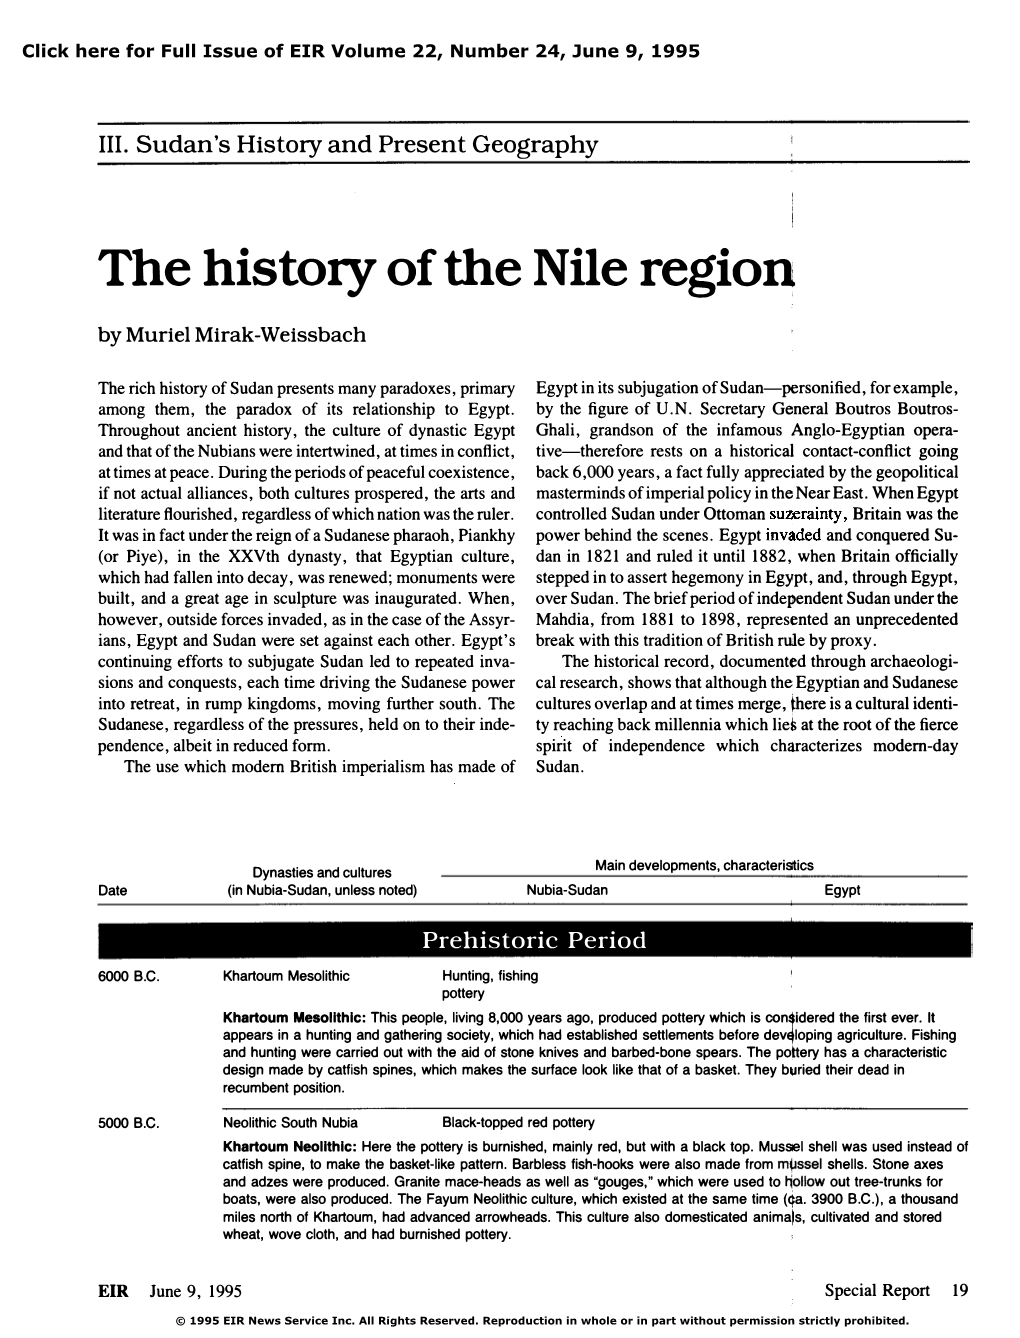 The History of the Nile Region